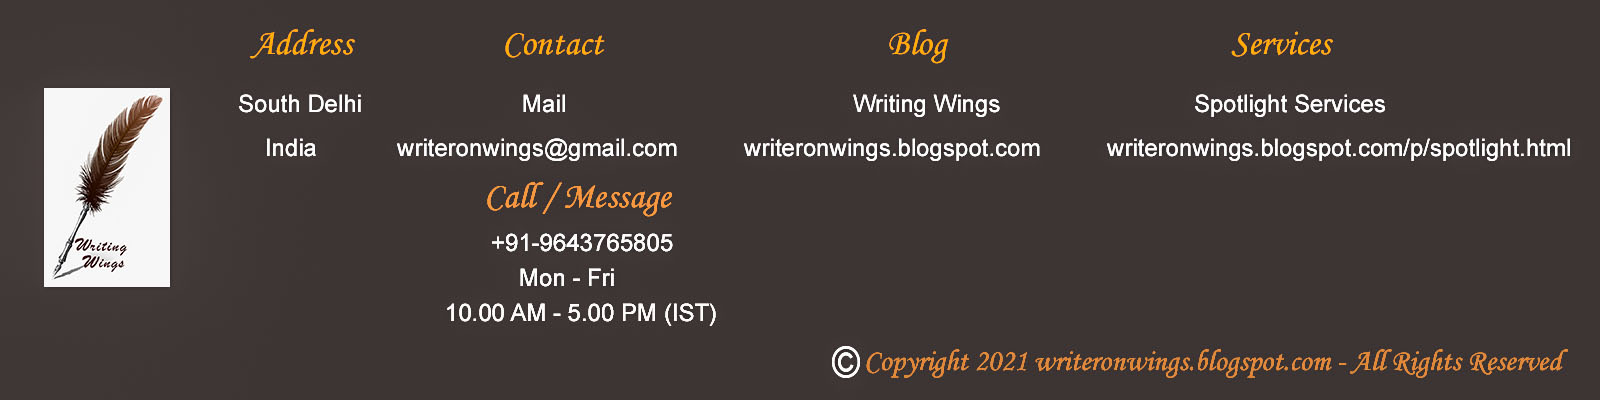 Footer | Contact Address | Writing Wings